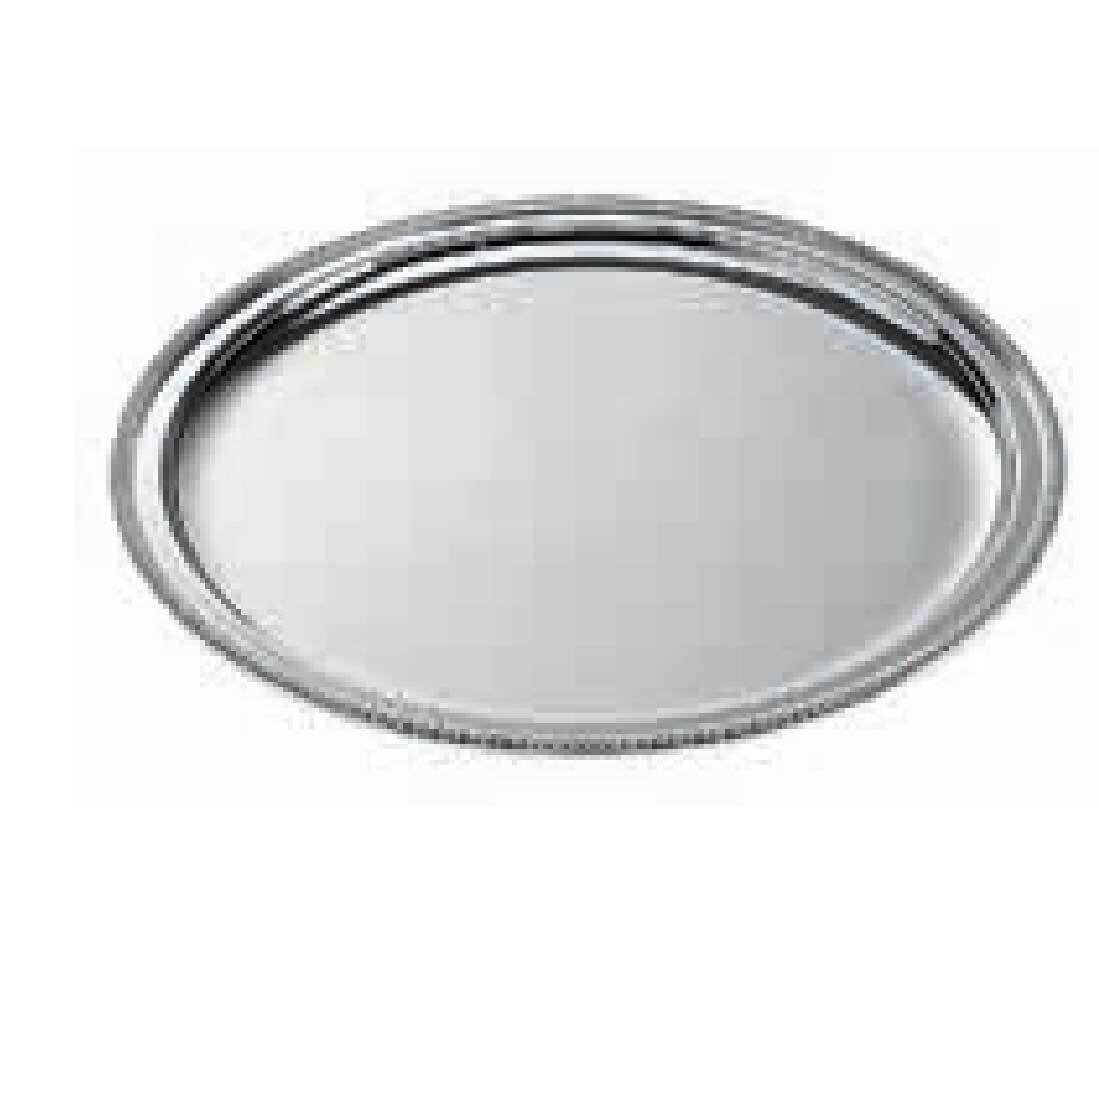 Ercuis Trianon Round Tray 16.125 Inch Silver Plated F51T460-41